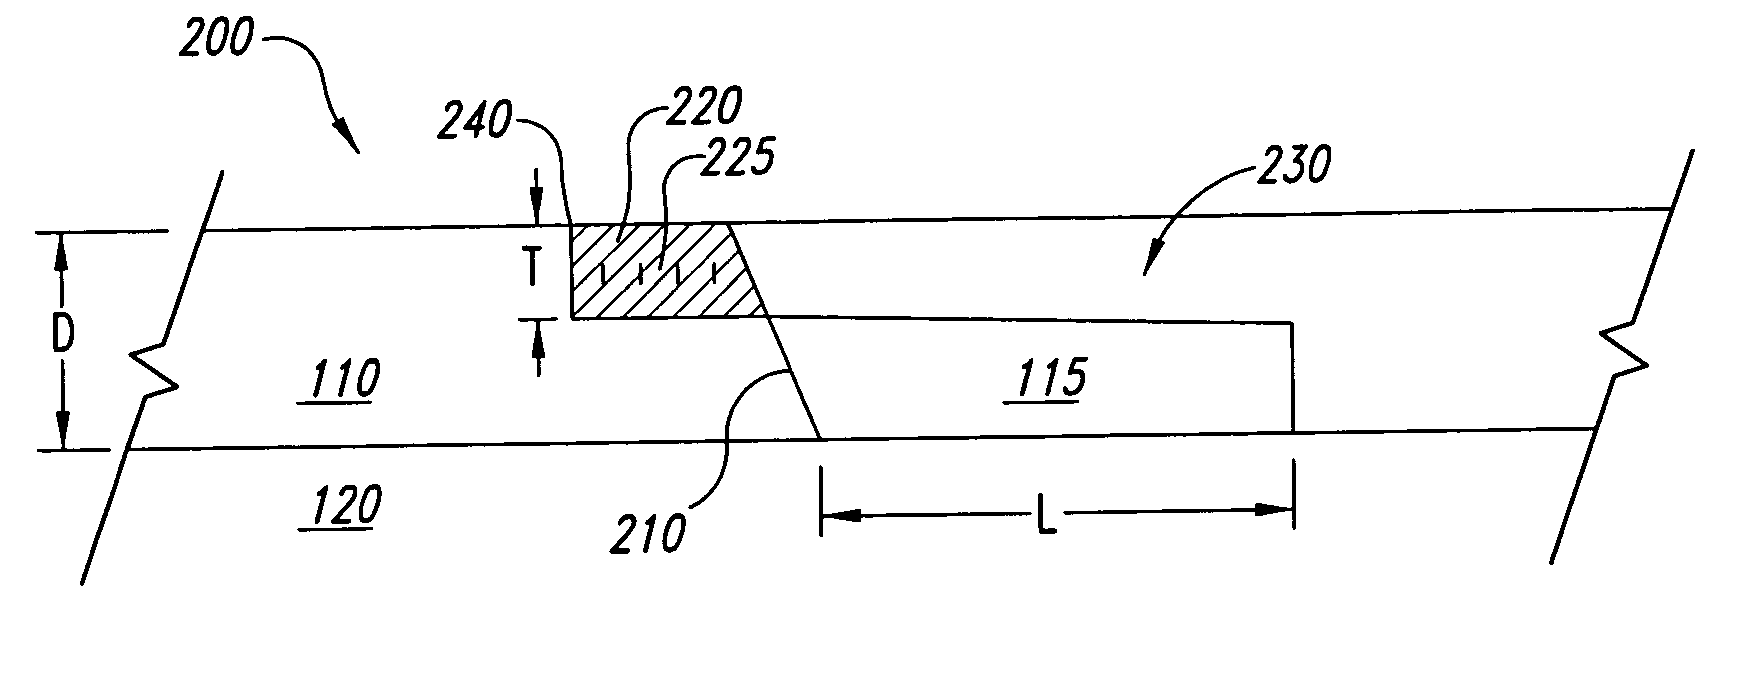 Method and system for containment, such as a containment cap for solid waste constructed of modified asphalt